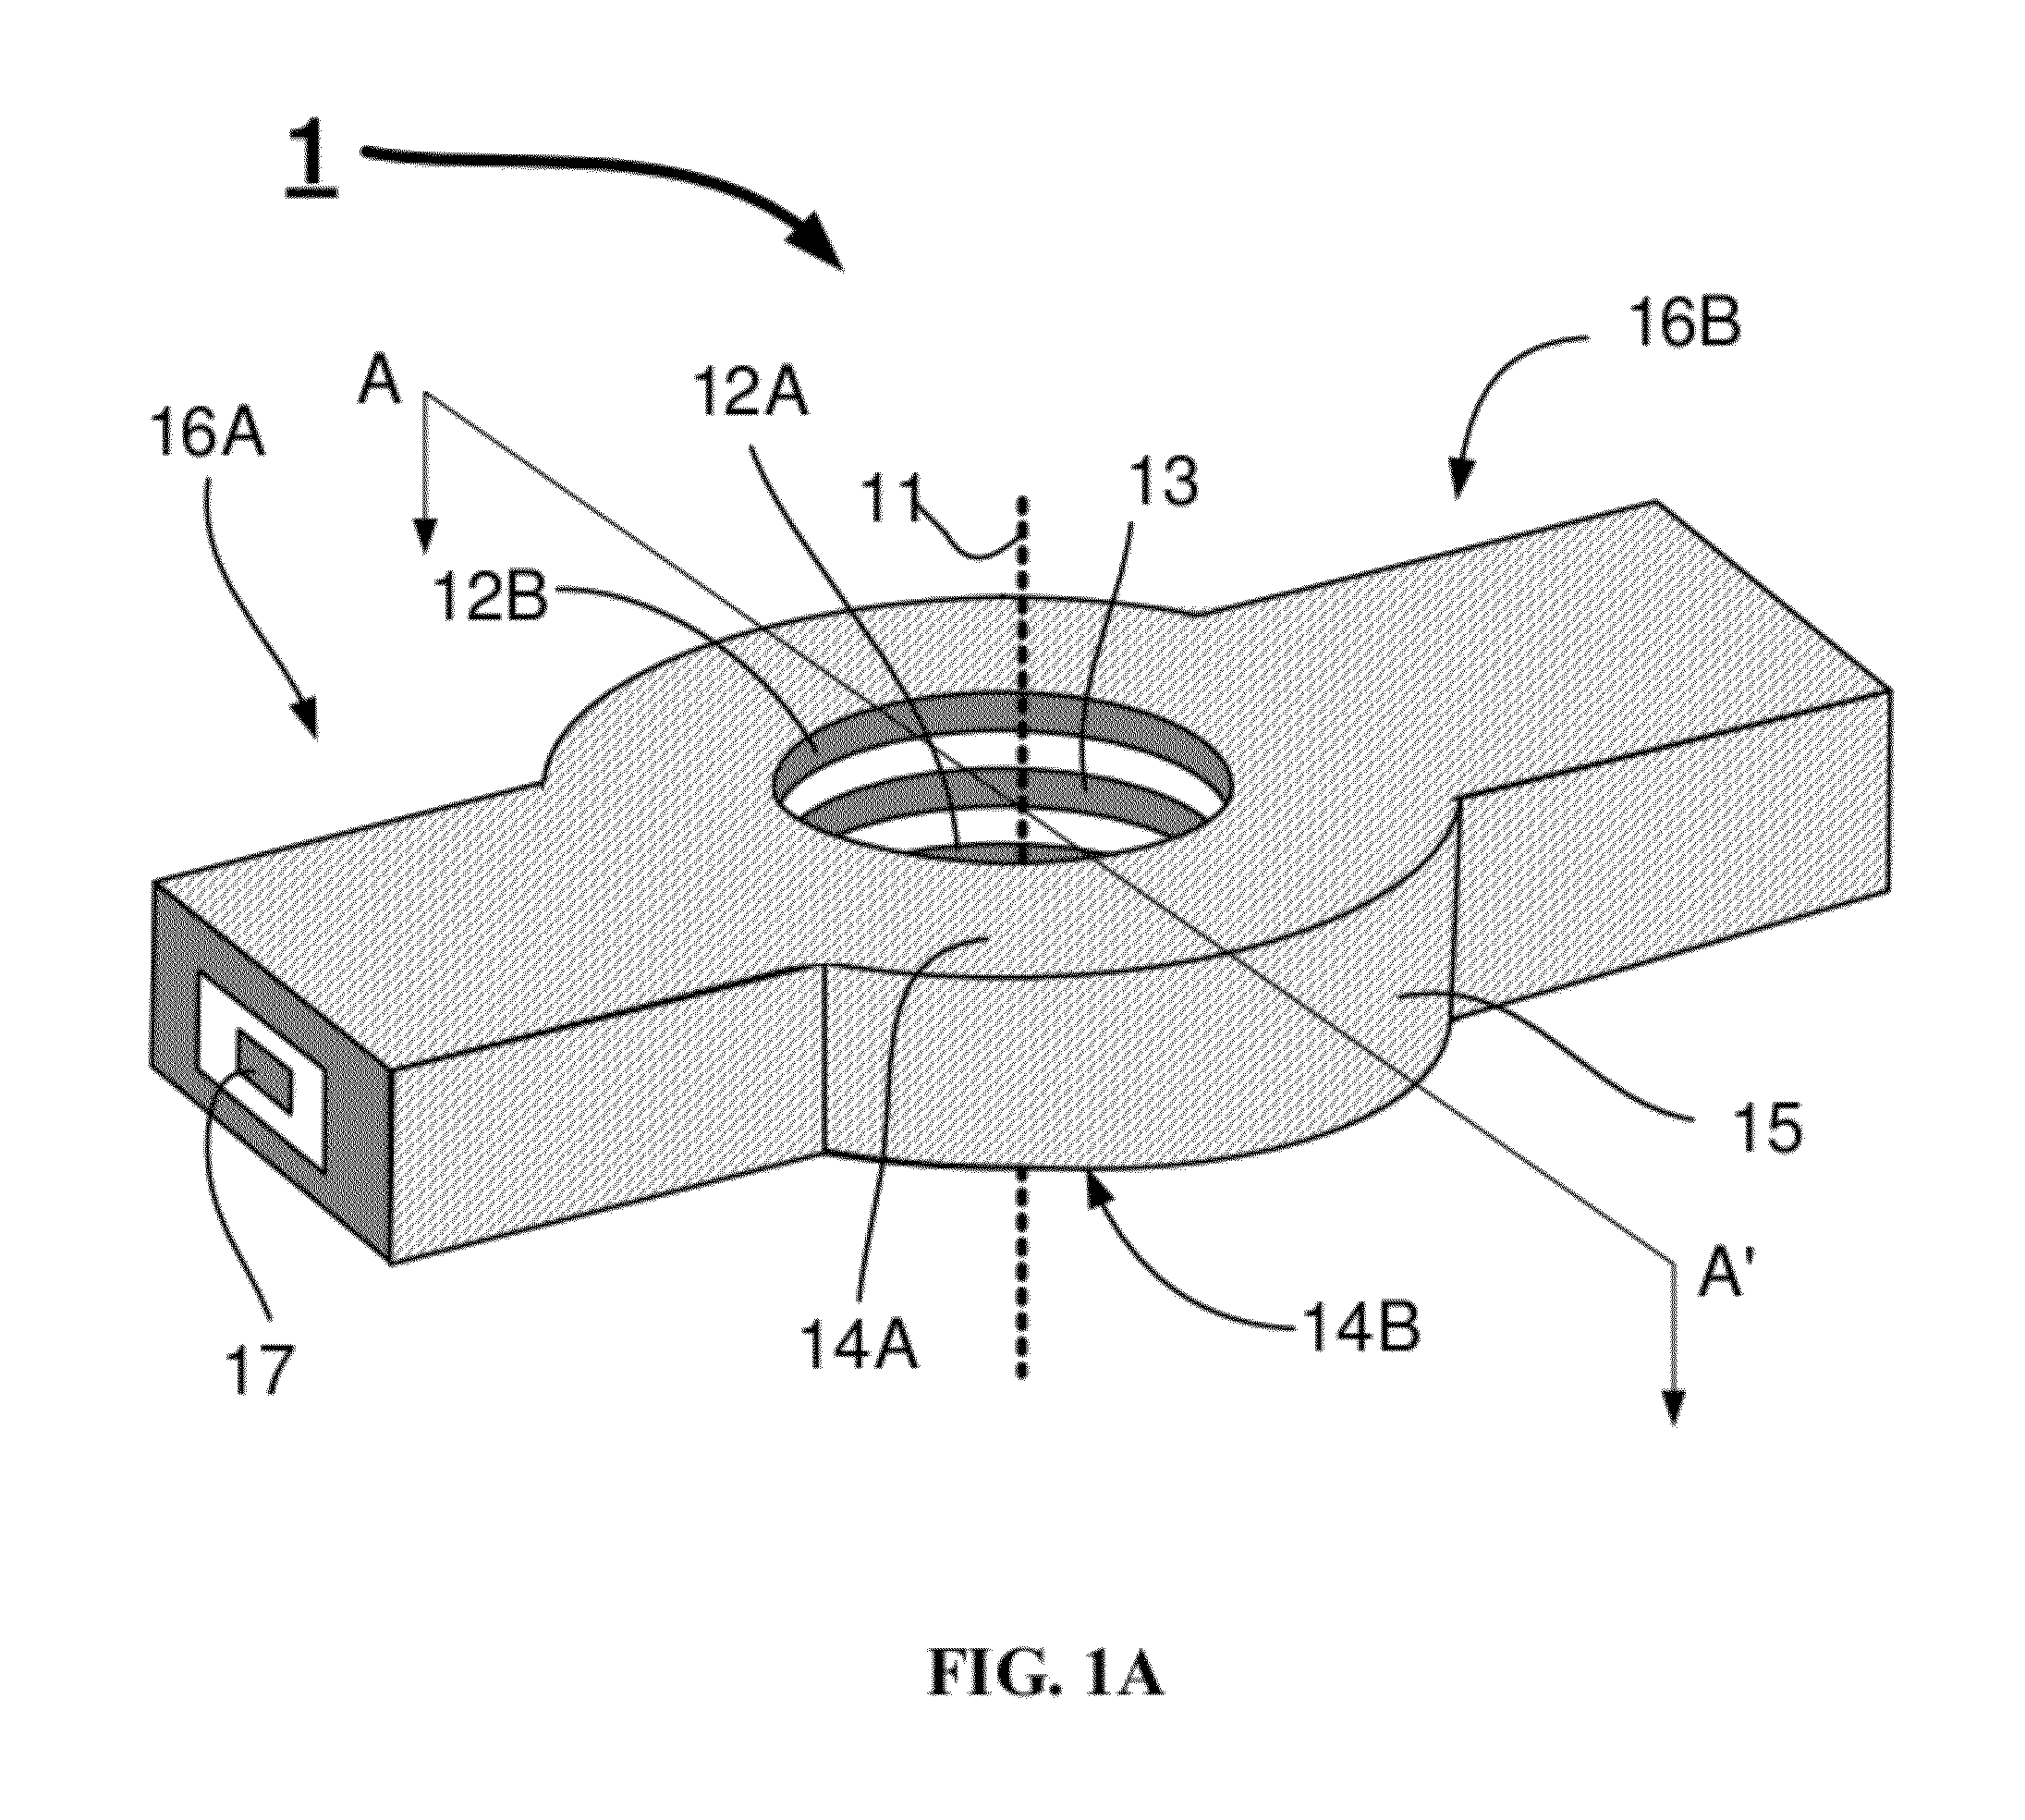 Method for Centering an Optical Element in a TEM Comprising a Contrast Enhancing Element